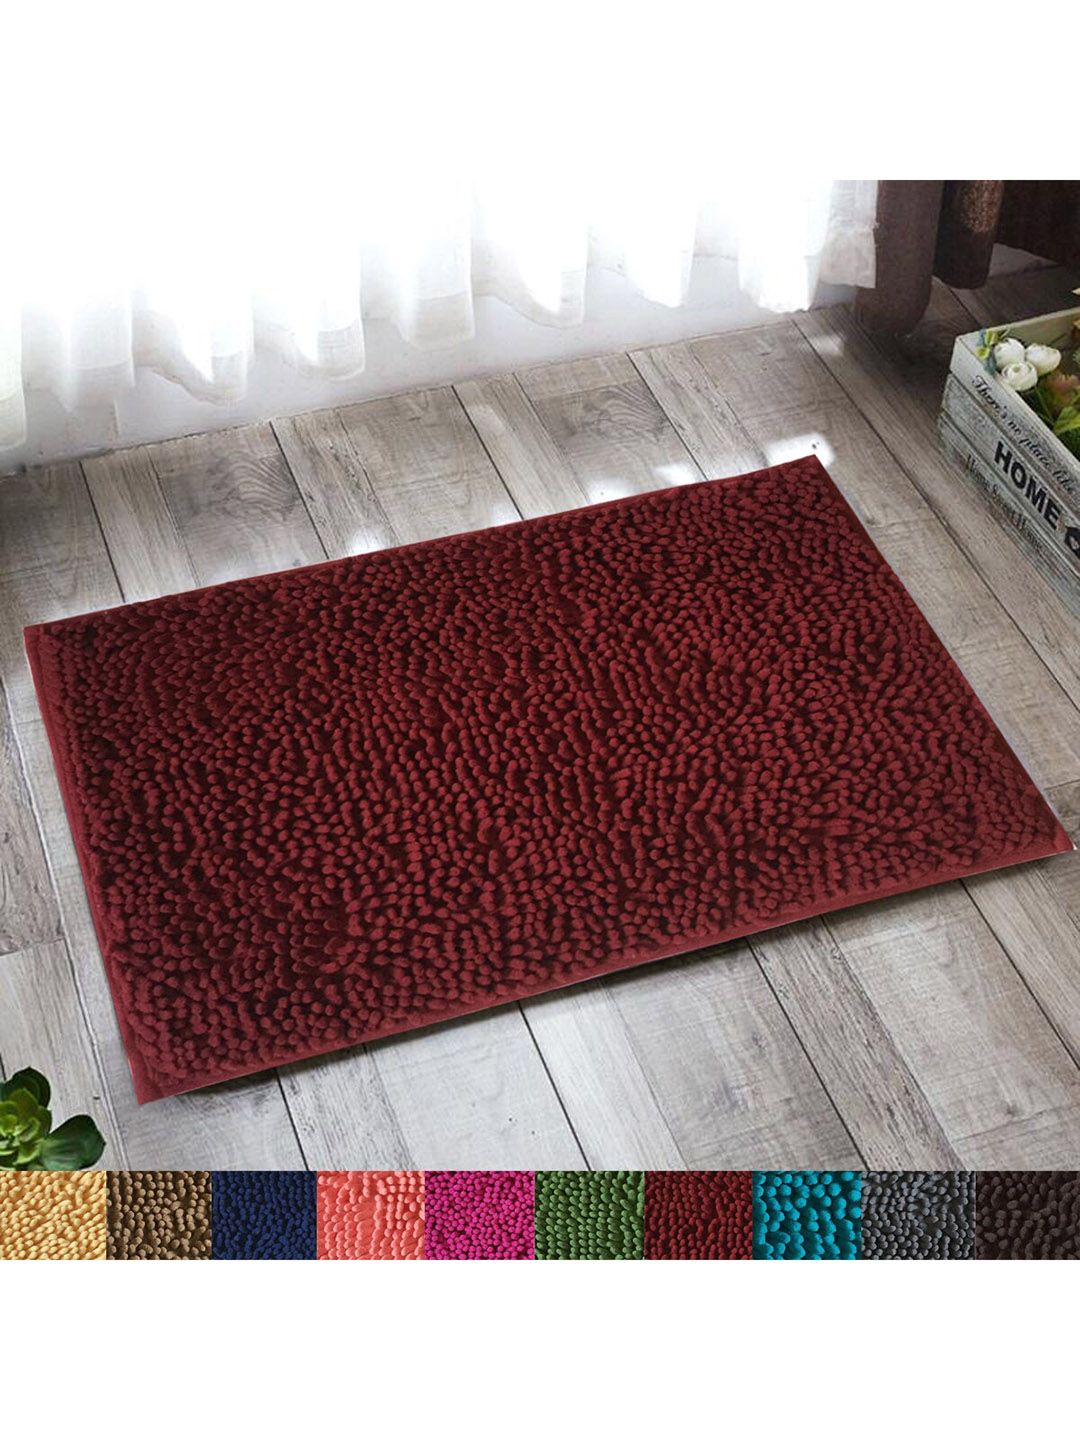 Lushomes Maroon Thick Fluffy Chenille 1200 GSM Bathmat with High Pile Microfiber Price in India